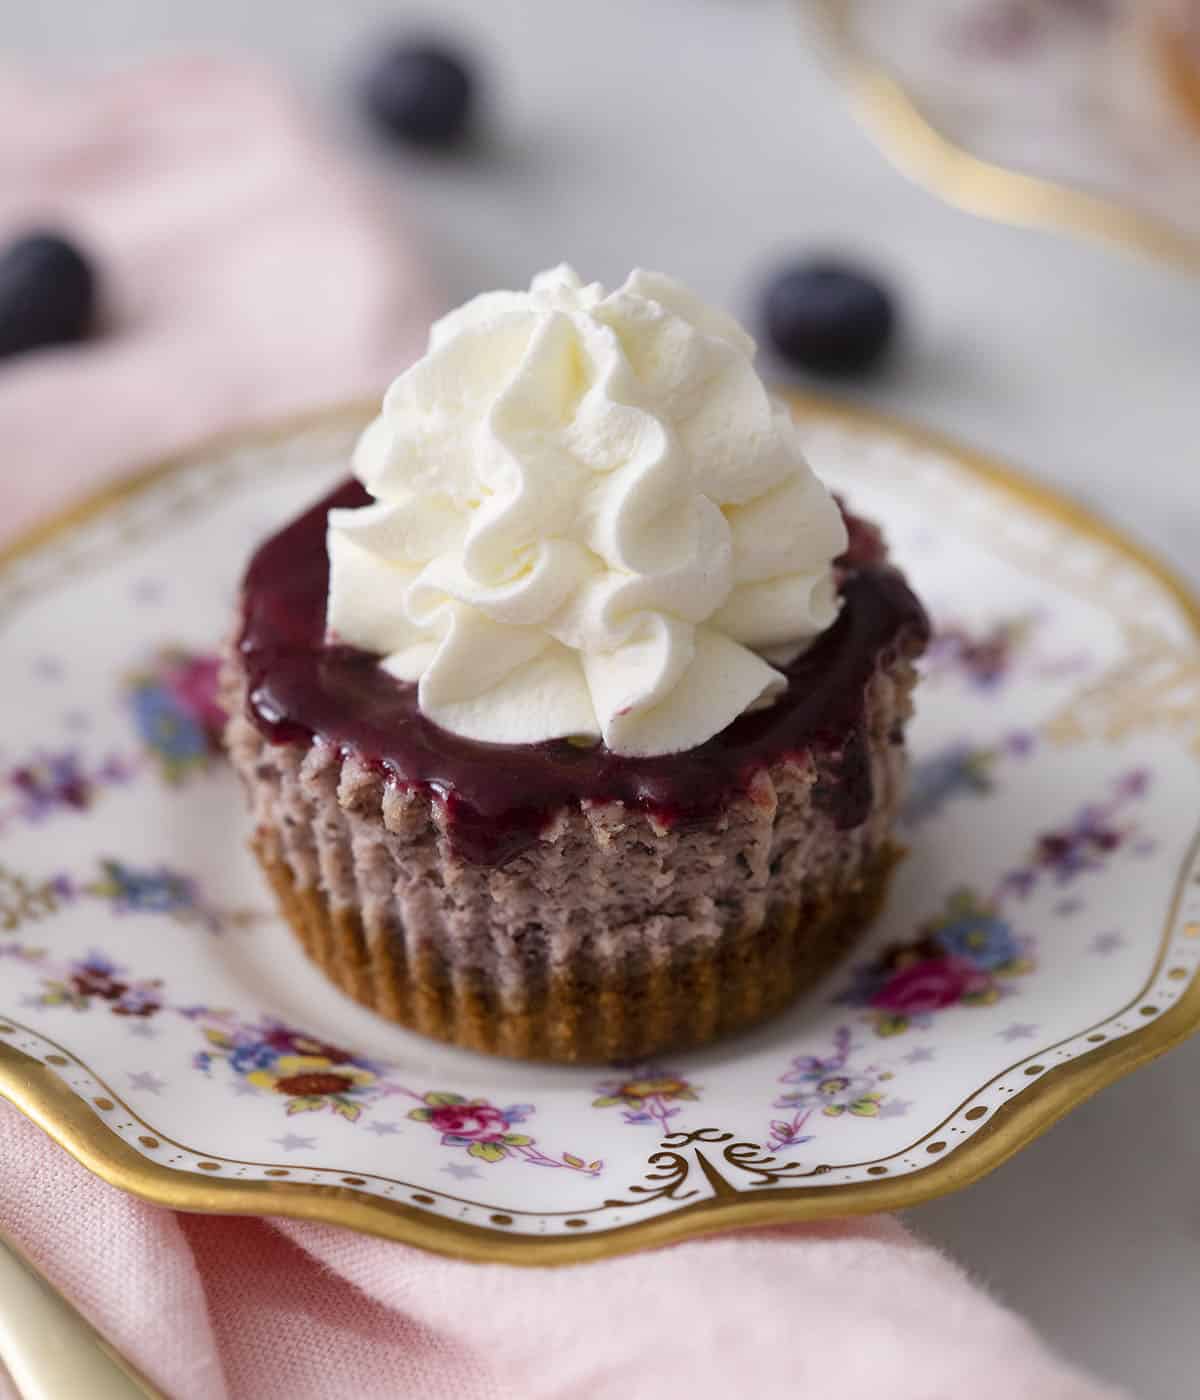 A Blueberry mini cheesecake topped with whipped cream on a plate.